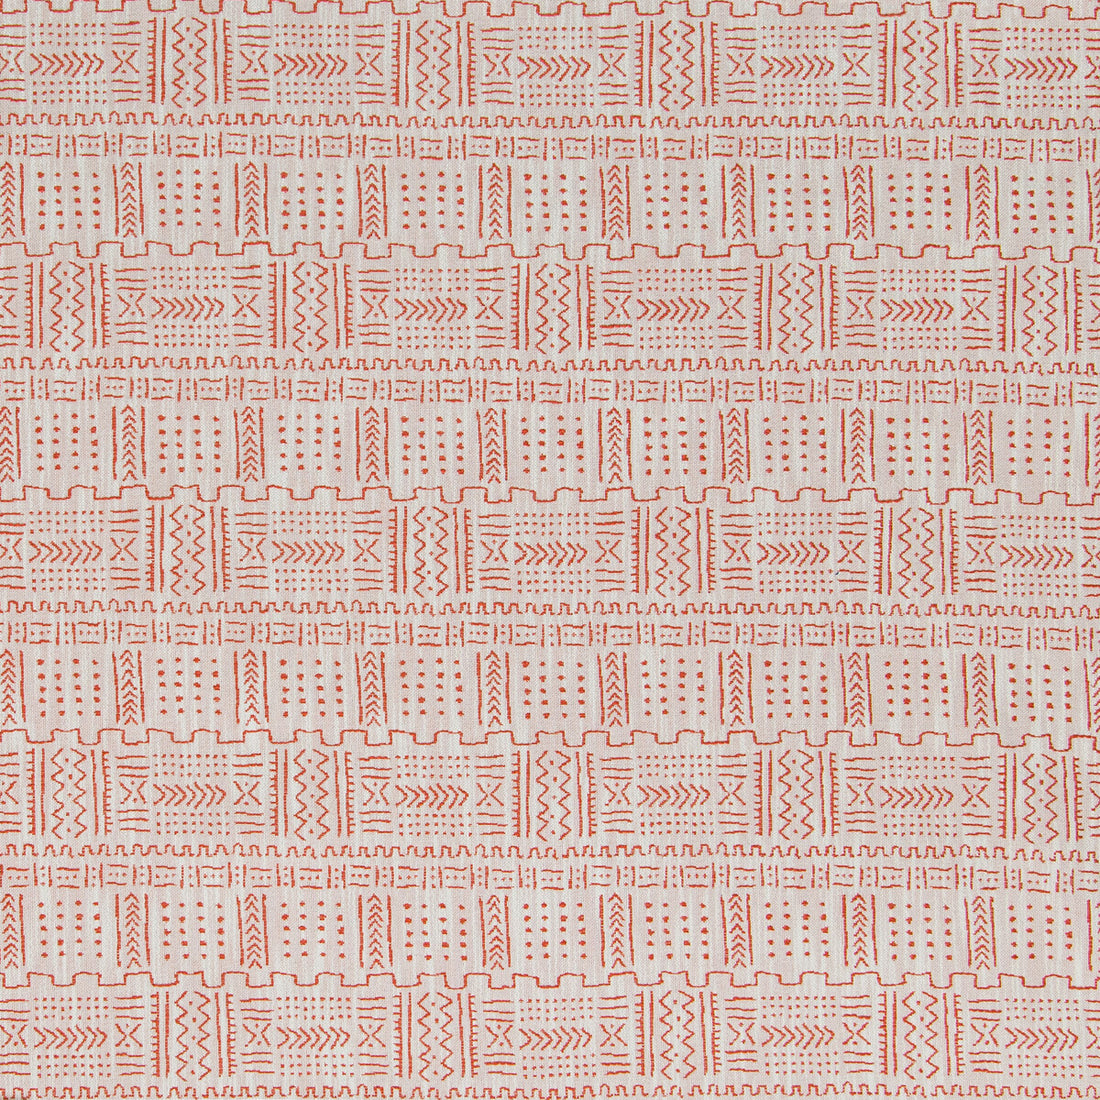 Amanzi fabric in tango color - pattern 35831.12.0 - by Kravet Design in the Indoor / Outdoor collection